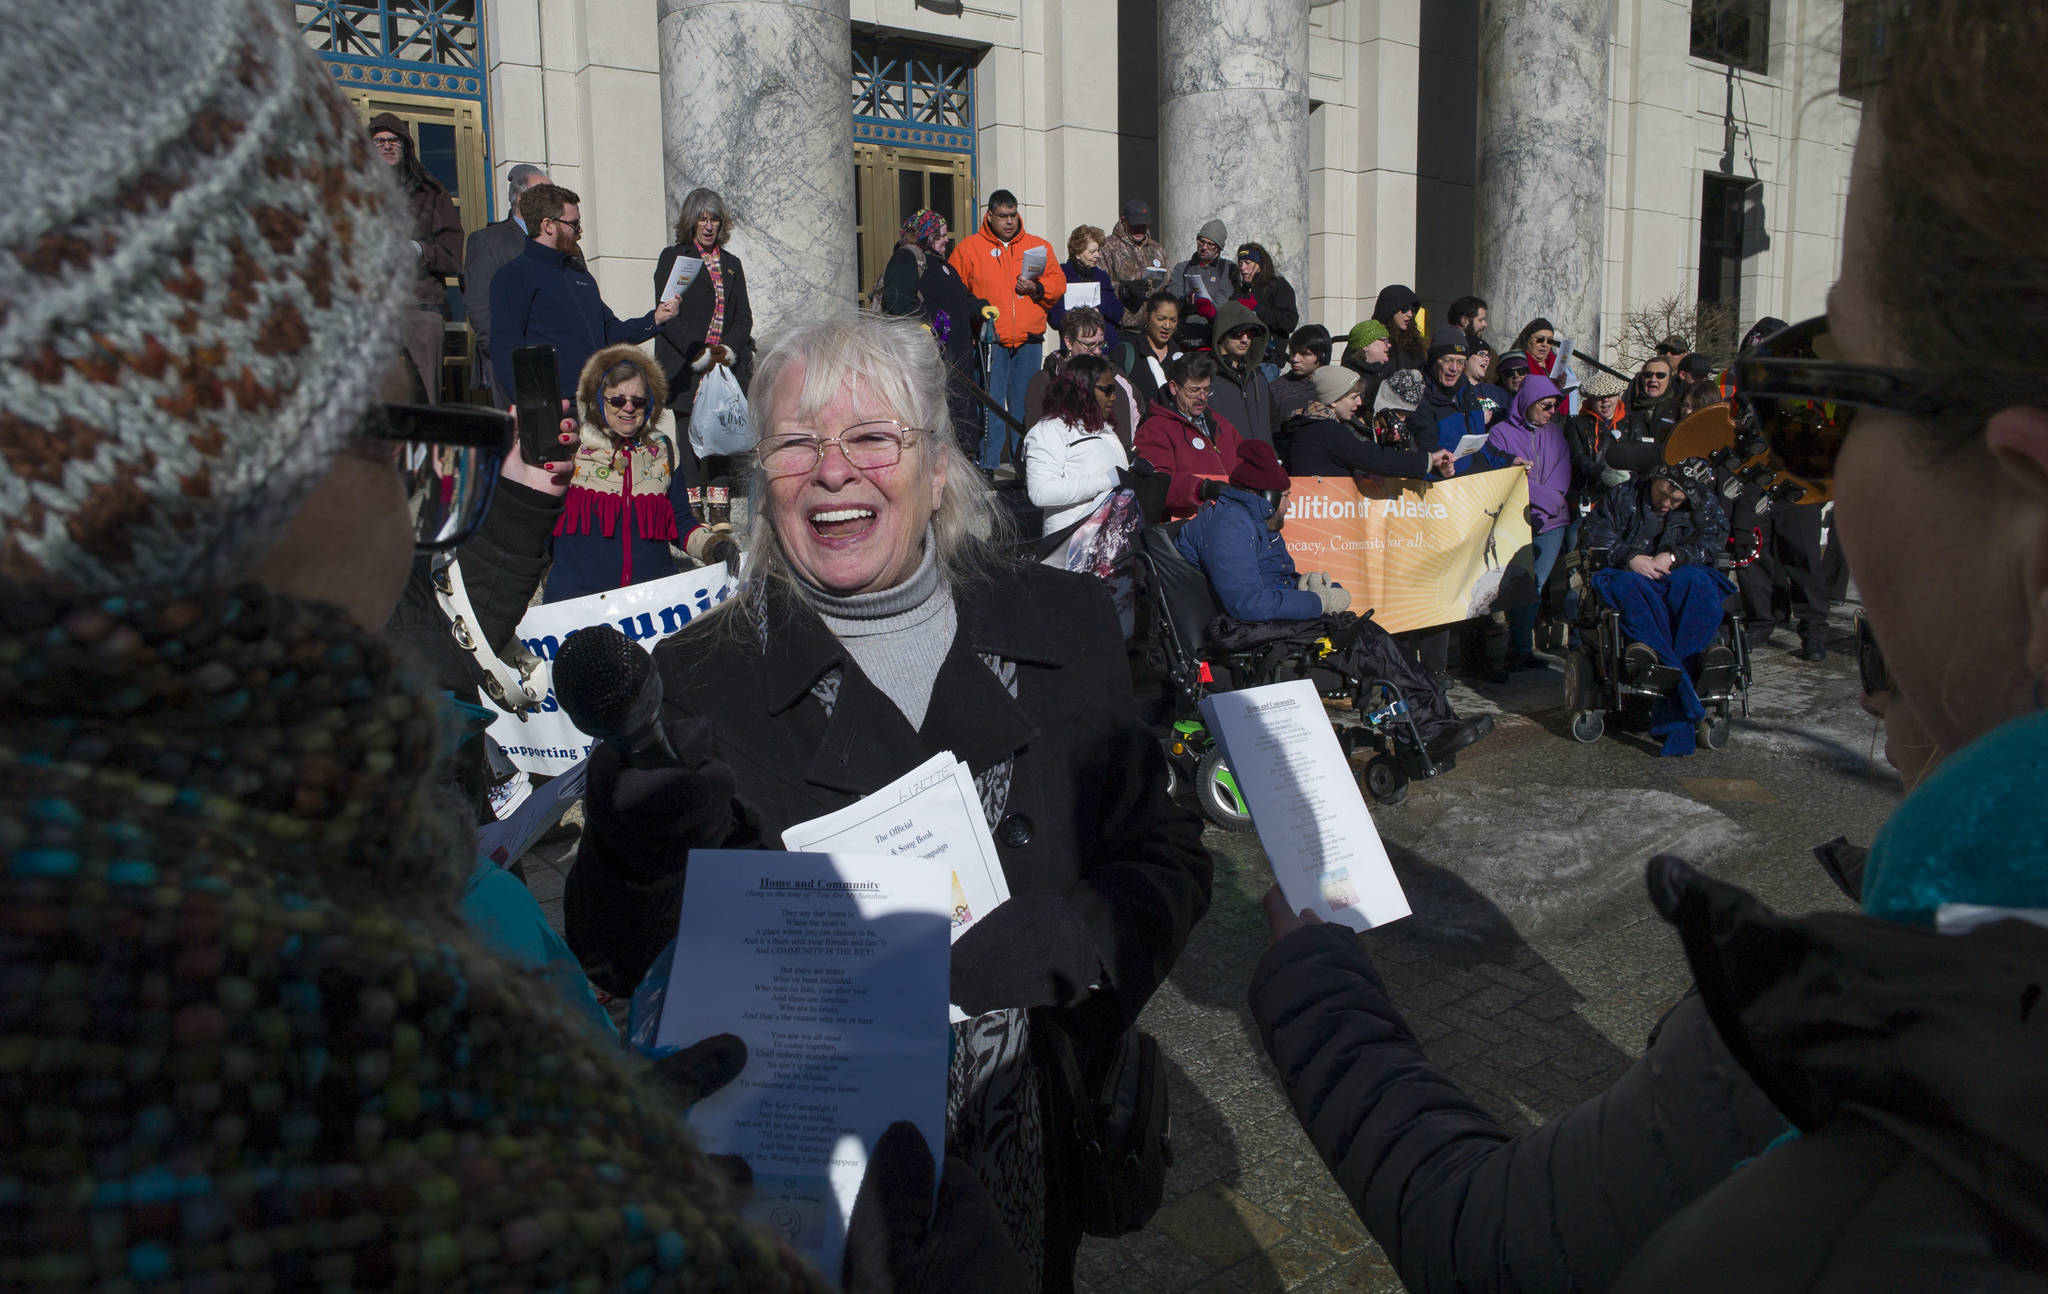 Lizette Stiehr, executive director for the Alaska Association on Developmental Disabilities, holds up a loud speaker microphone during singing at Key Coalition Rally at the Capitol on Friday, March 2, 2018. The Key Coalition of Alaska educates legislators about the importance of sustaining community-based services for people with disabilities and Intellectual and Developmental Disabilities. (Michael Penn | Juneau Empire)